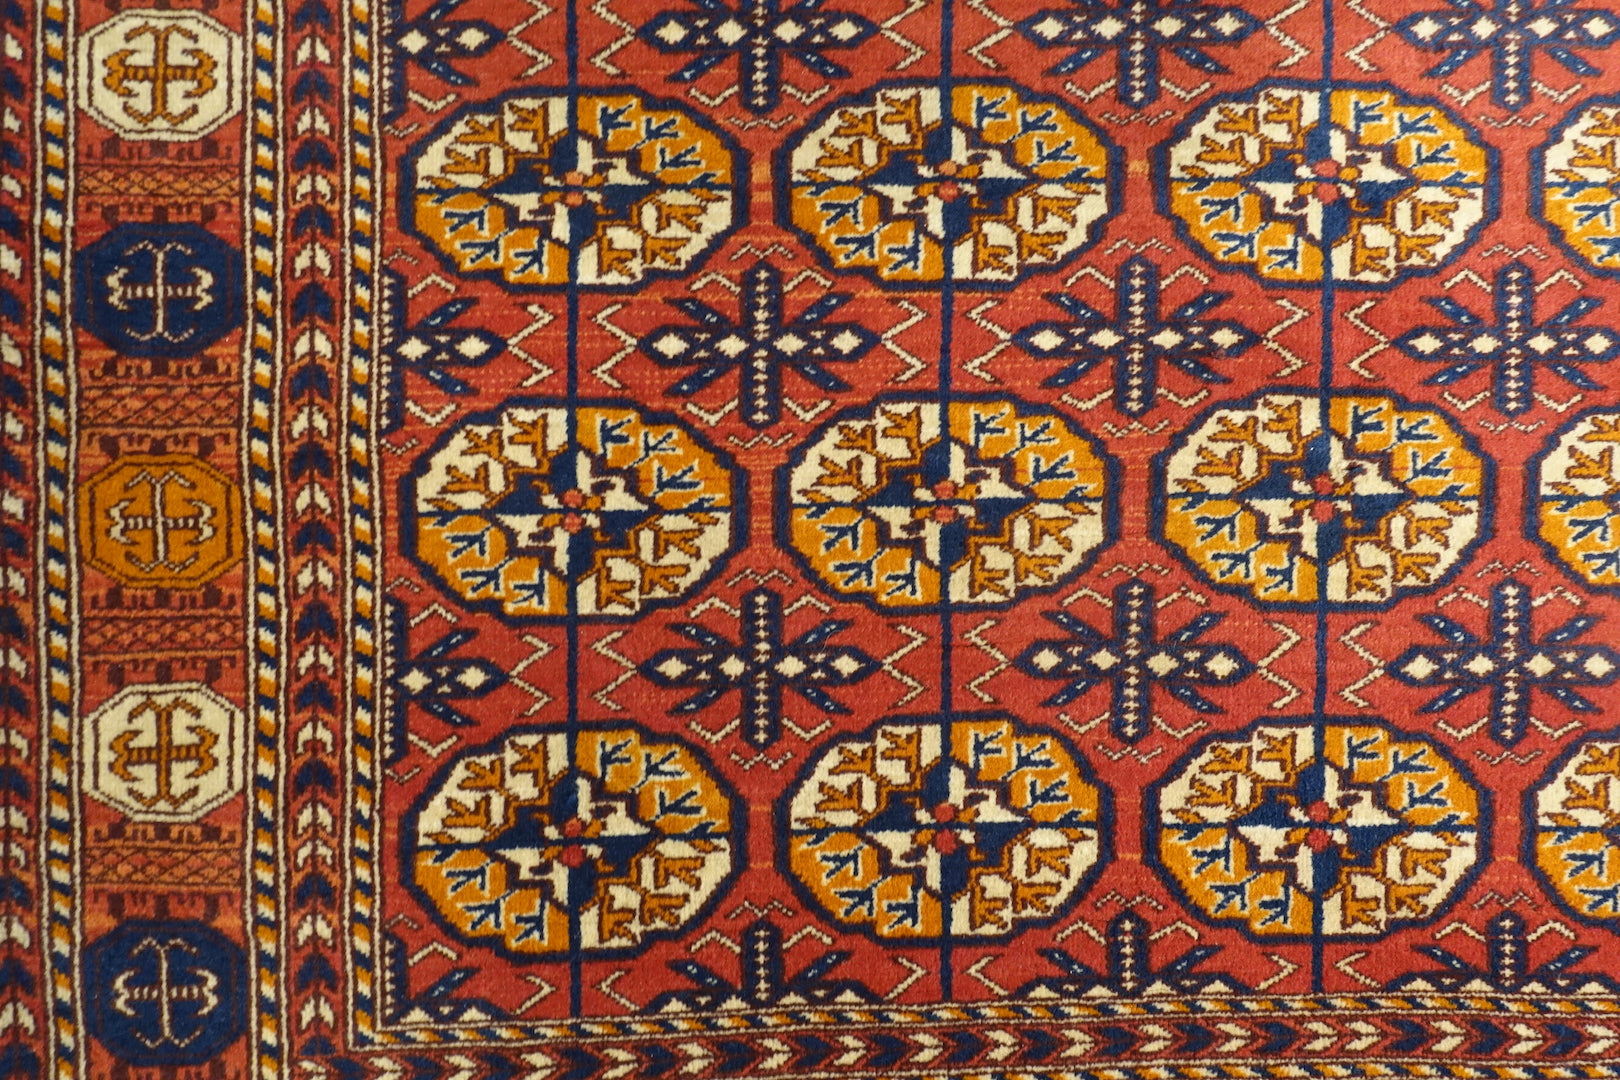 It is a 4 feet by 6 feet wool rug made by jail inmates in central India. The colours used are rust,orange,red,blue and yellow.